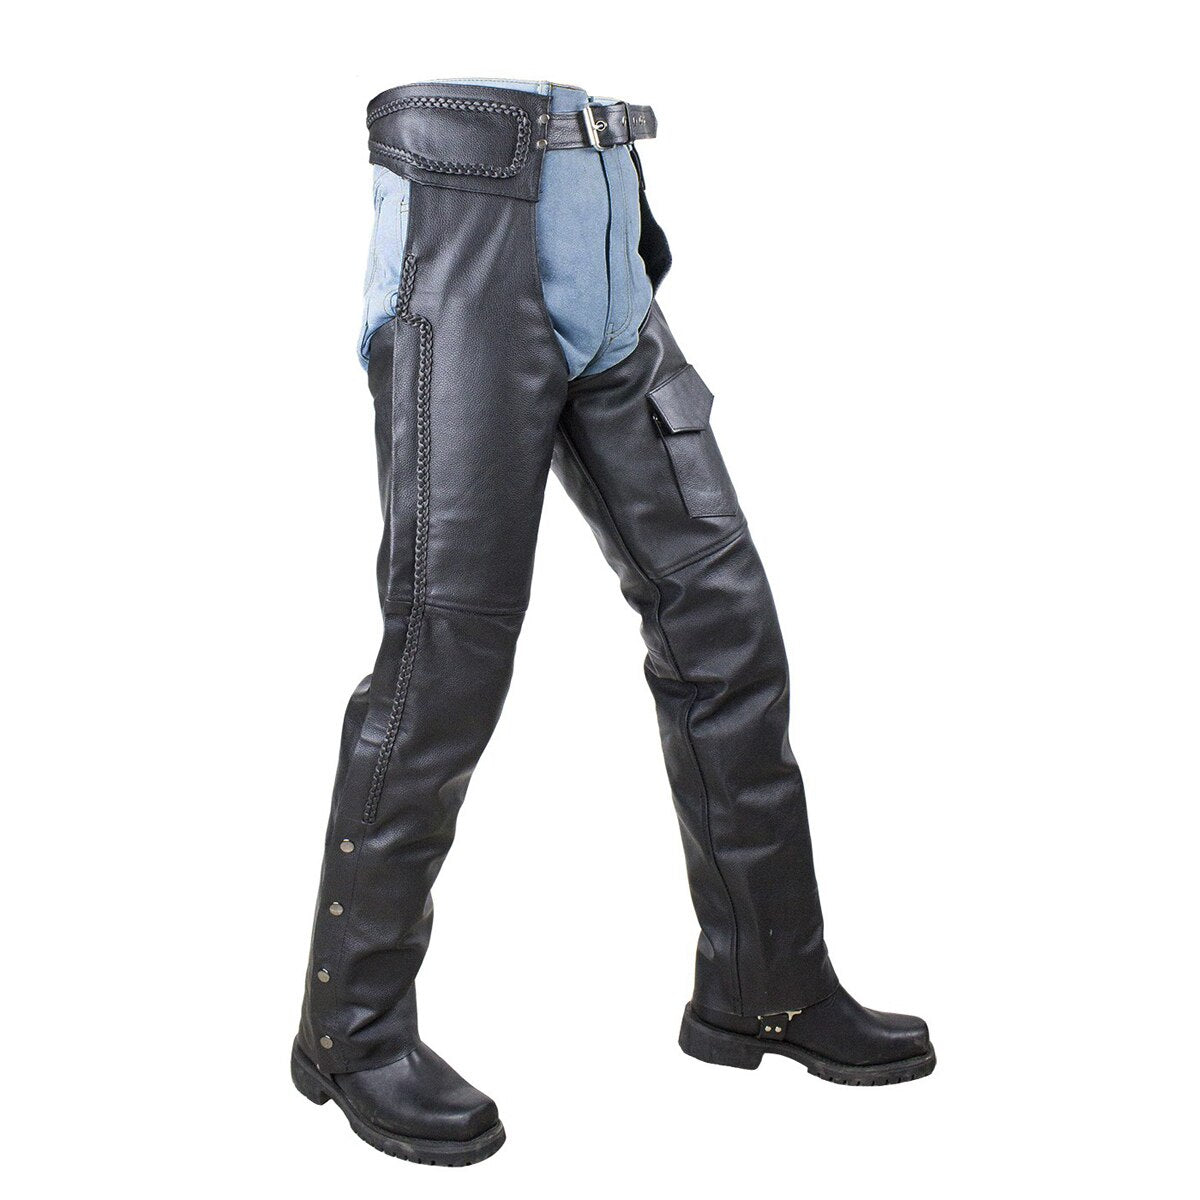 VL802 TG Vance Leather Top Grain Leather Chaps with Braid Trim